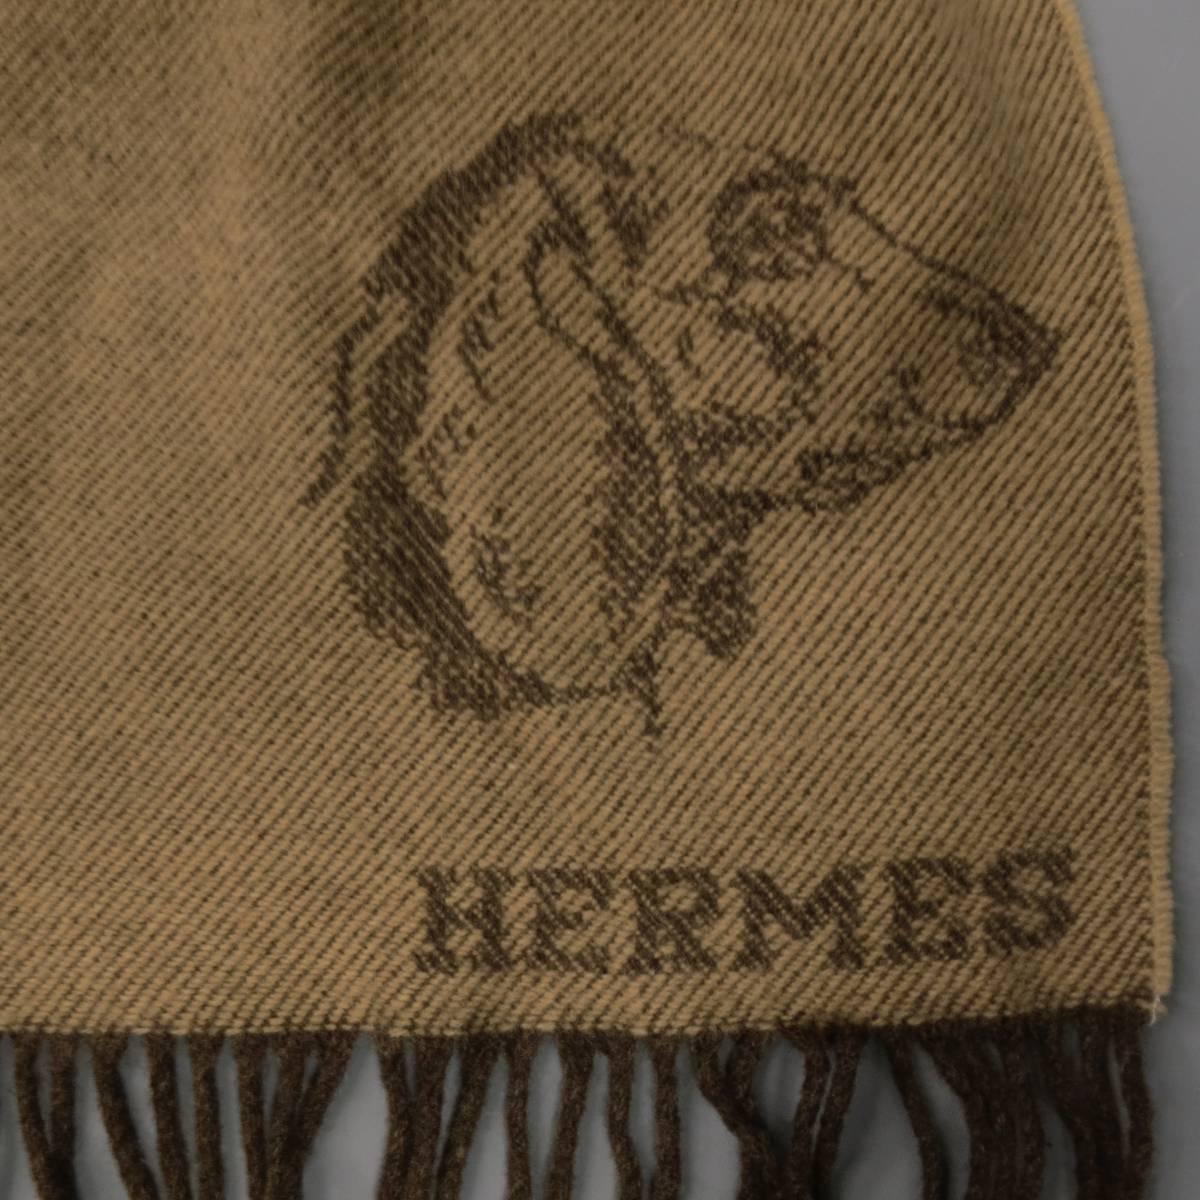 Vintage HERMES scarf in a beige cashmere wool blend knit with brown diagonal stripes, fringe hem, and Dachshund wiener dog head graphic. Made in Scotland.
 
Excellent Pre-Owned Condition.
 
Length: 68 in.
Width: 15 in.